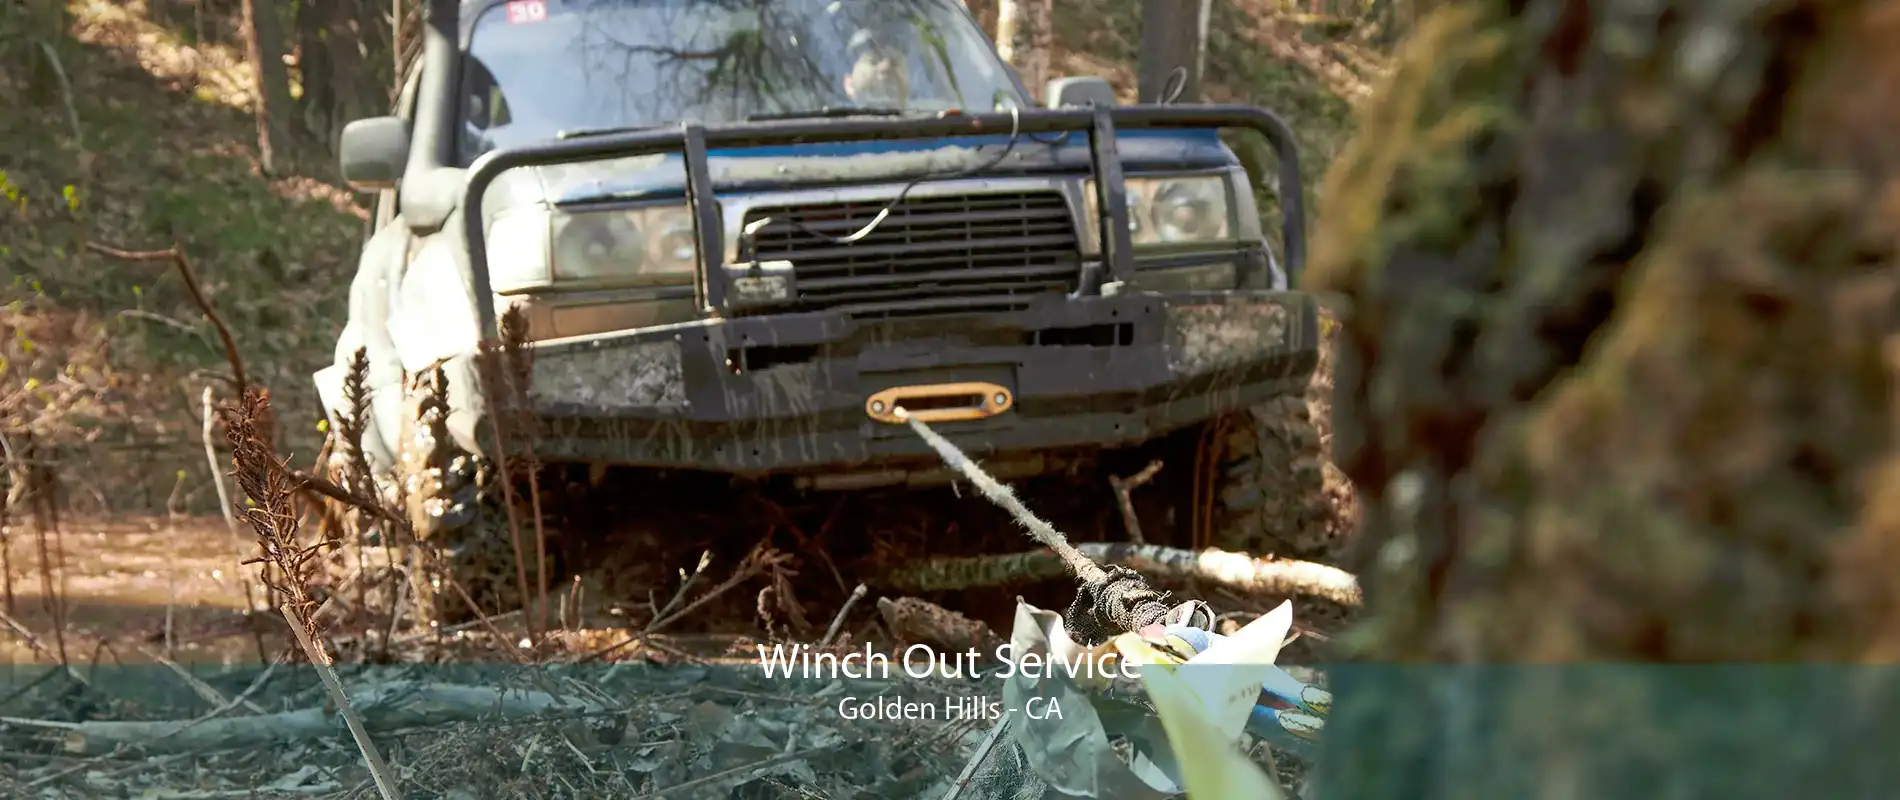 Winch Out Service Golden Hills - CA